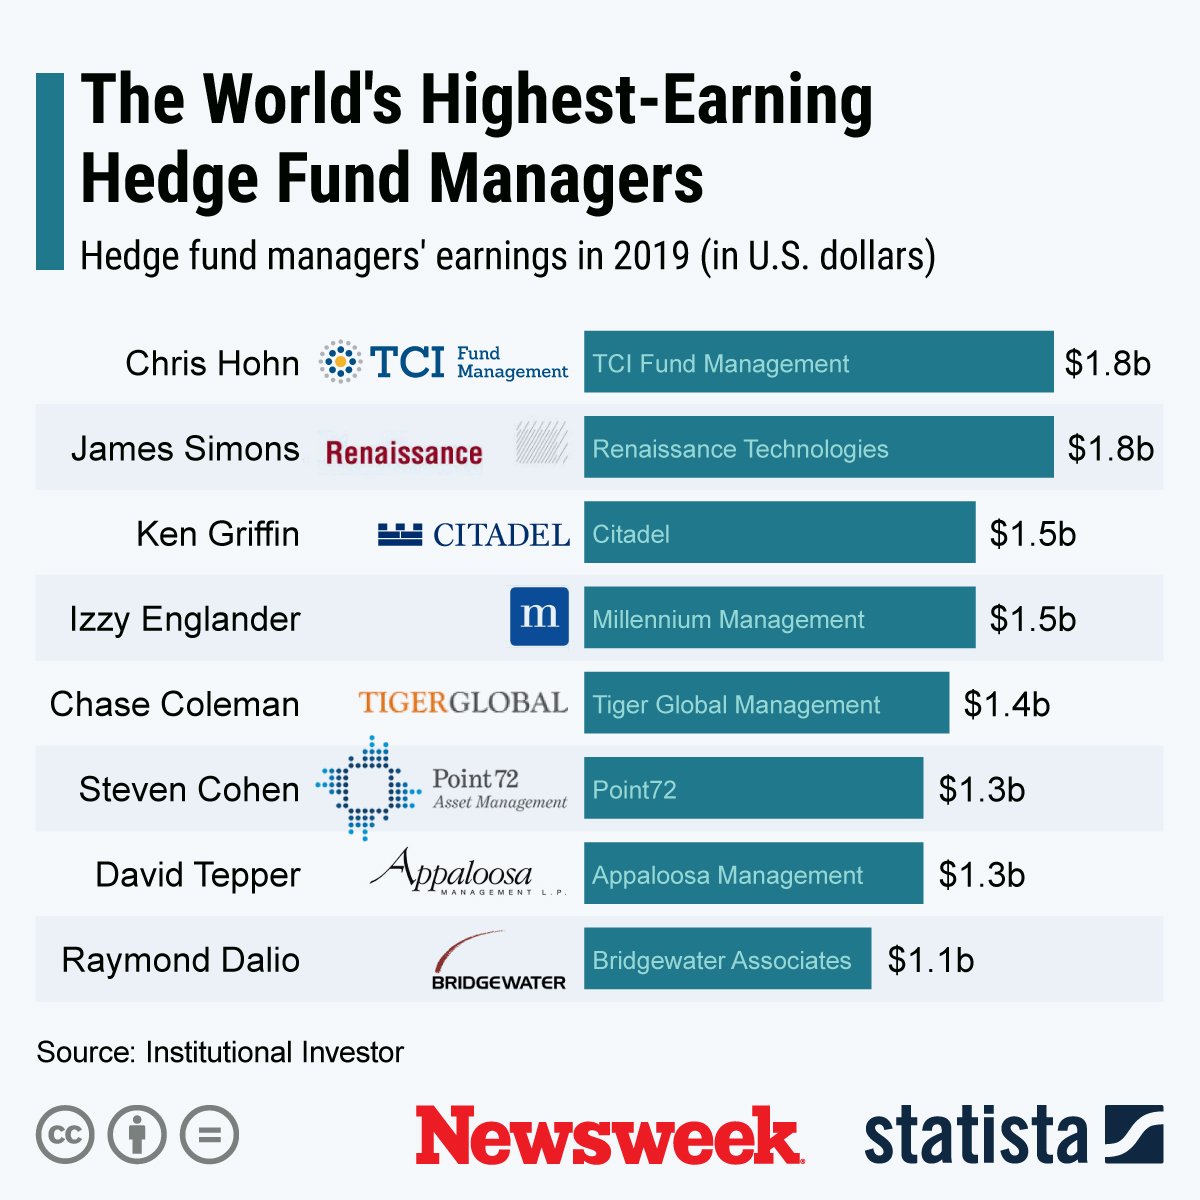 World's highest-earning Hedge Fund managers